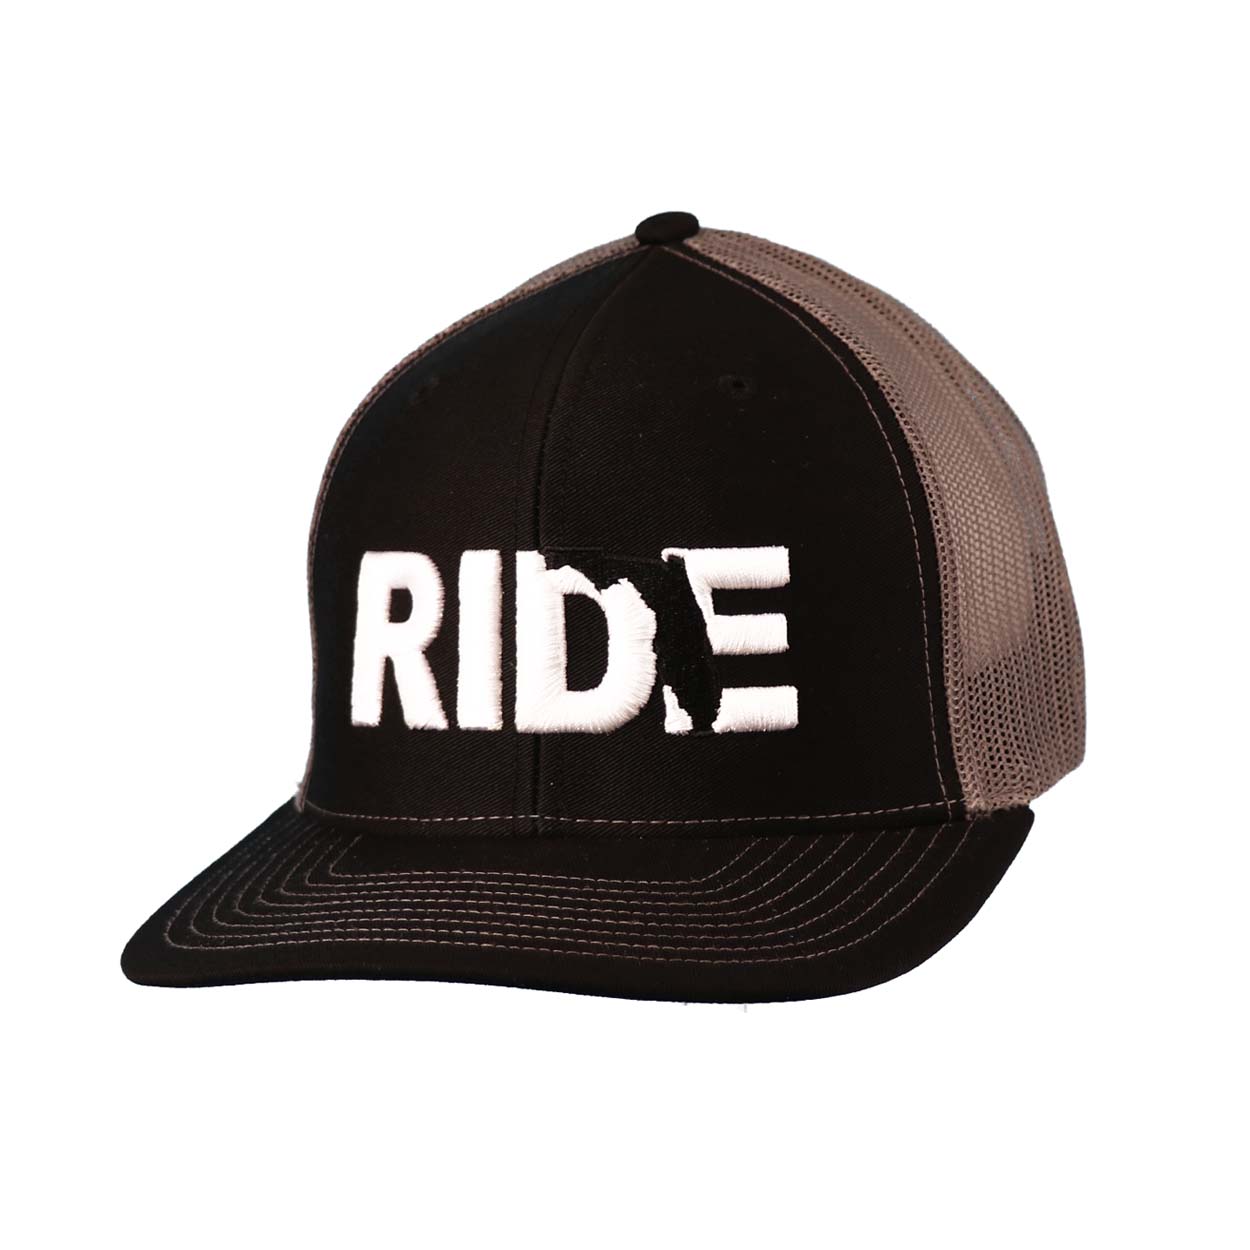 Ride Florida Classic Embroidered Snapback Trucker Hat Black/Charcoal